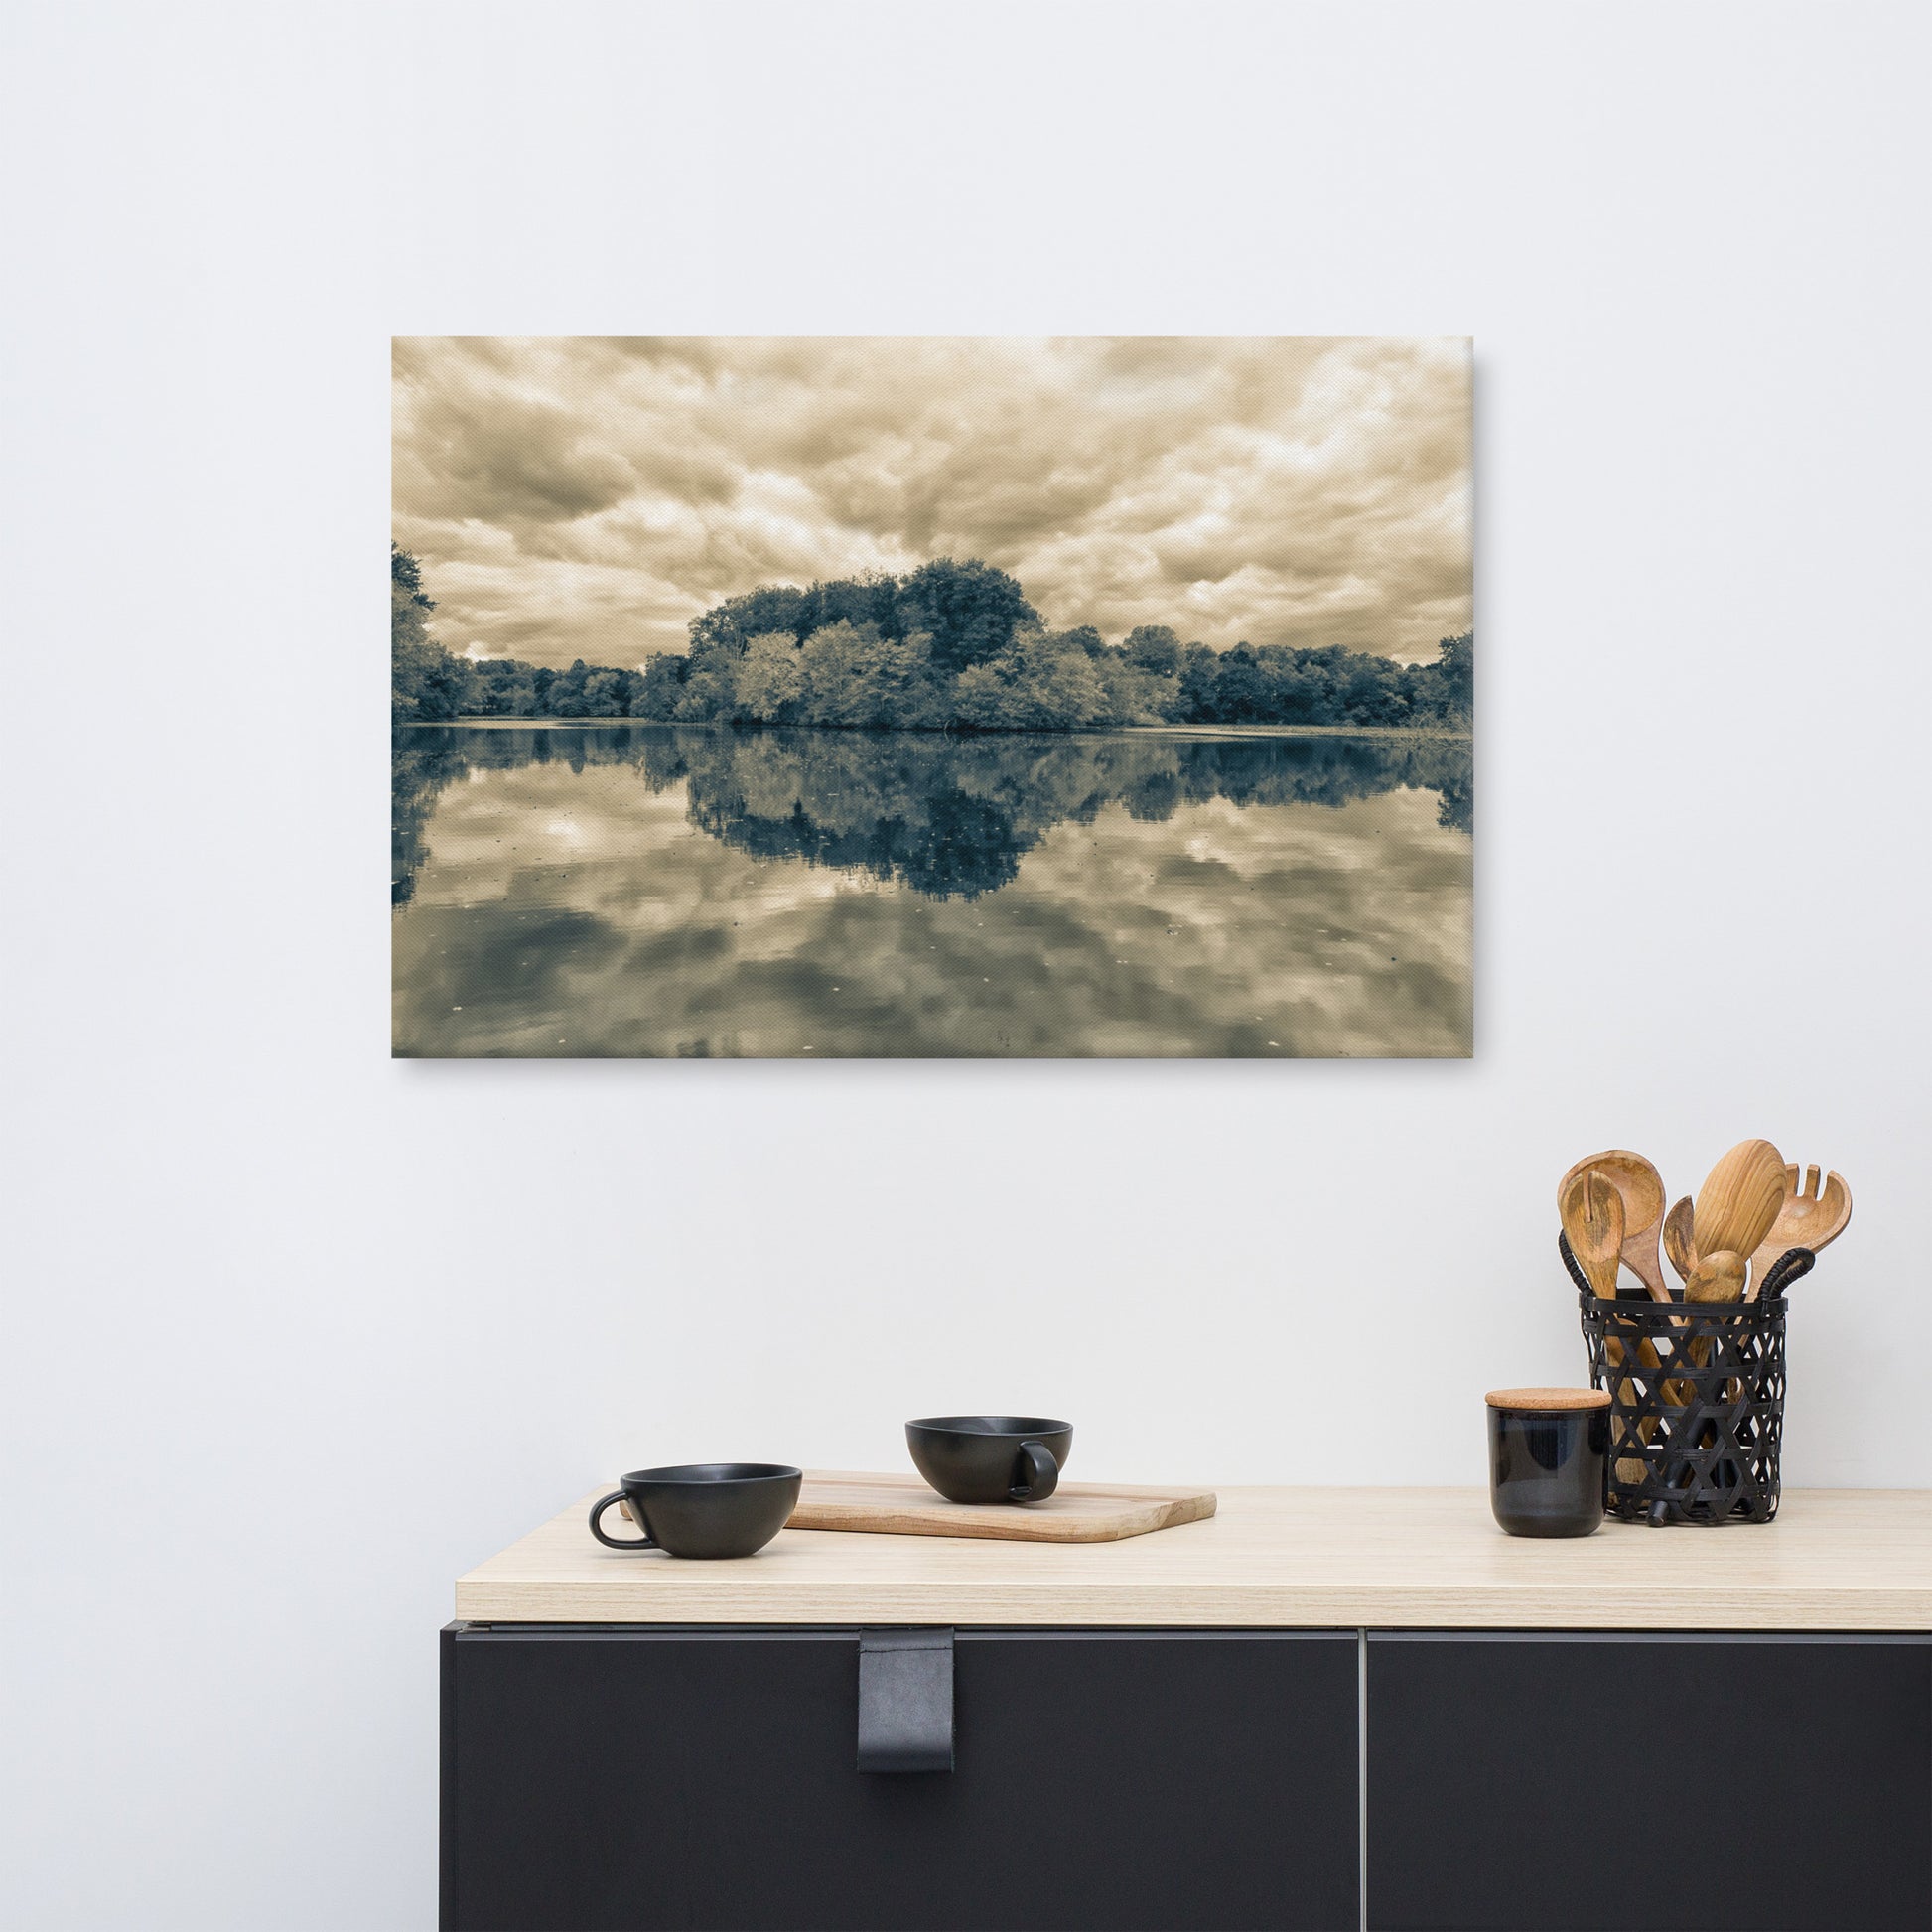 Canvas Wall Art Dining Room: Autumn Reflections Split Tone - Rural / Country Style / Botanical / Landscape / Nature Photograph Canvas Wall Art Print - Wall Decor